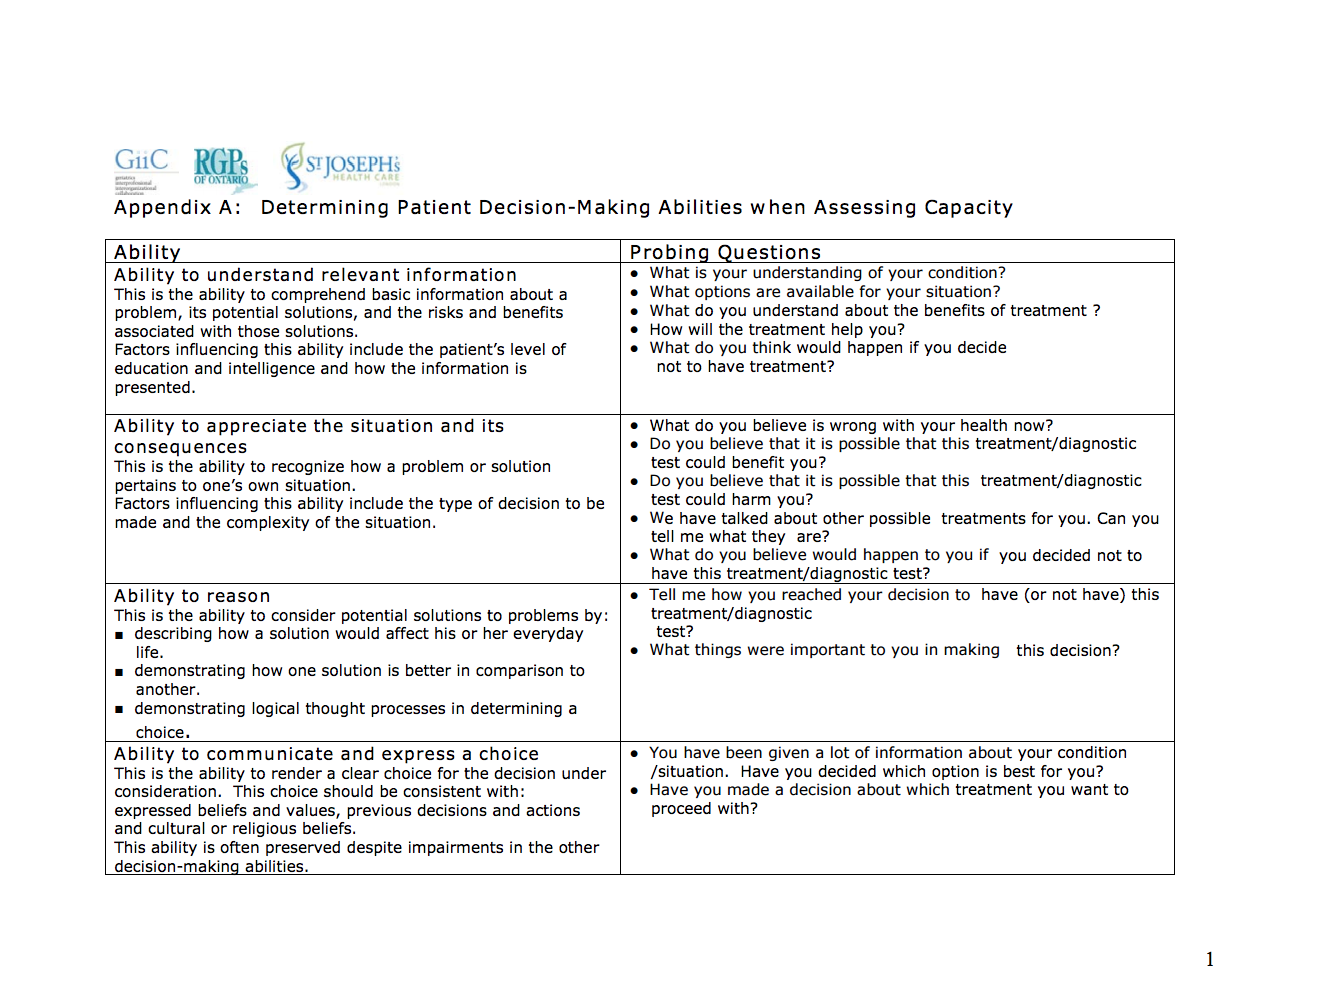 Determining Patient Decision Making Abilities when Assessing Capacity